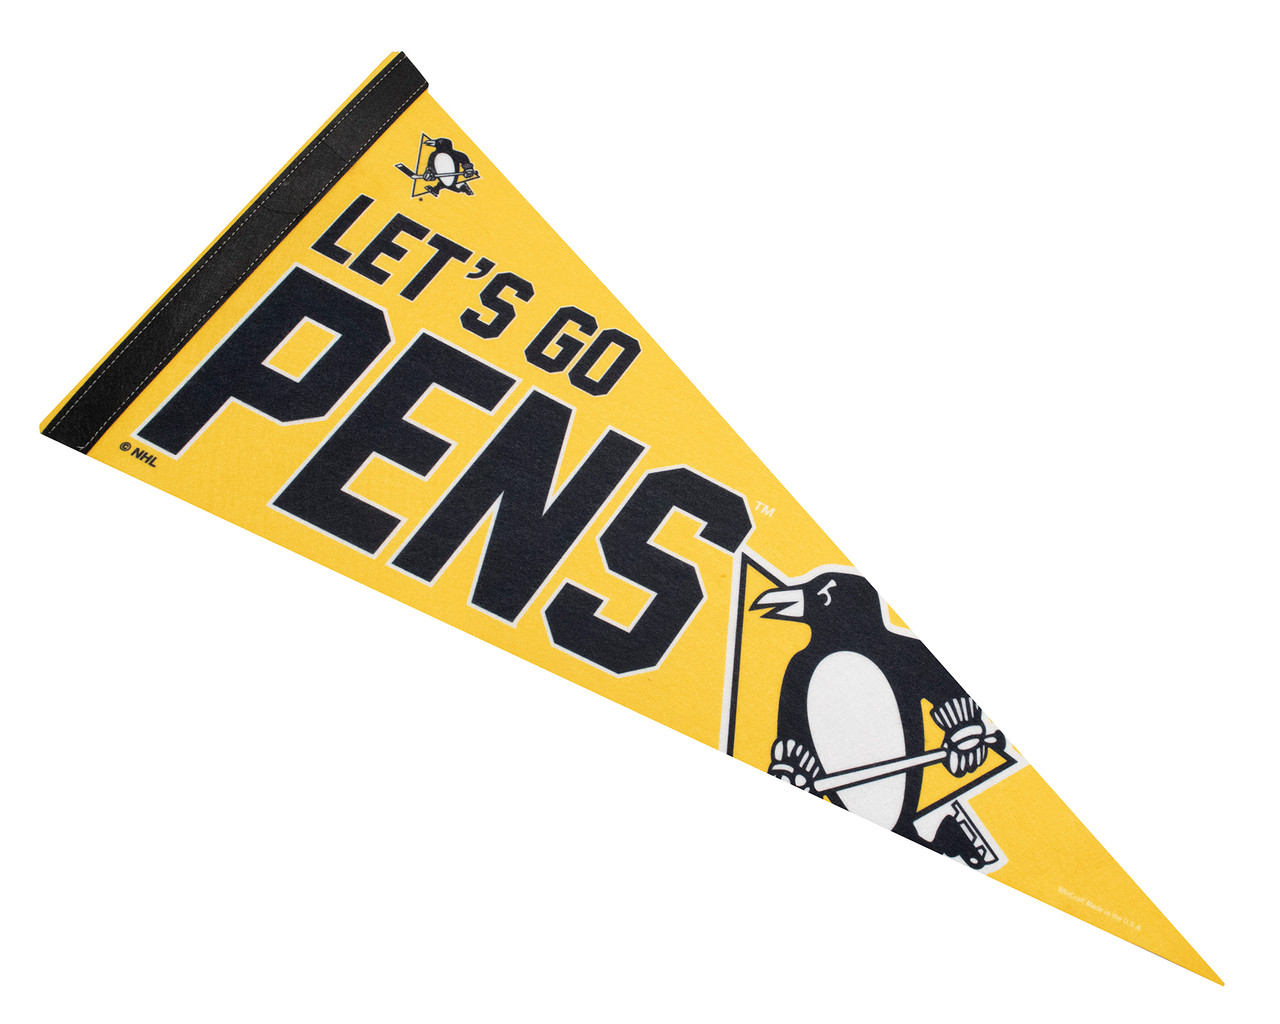 Official pittsburgh Penguins Lets Go Pens 2023 shirt, hoodie